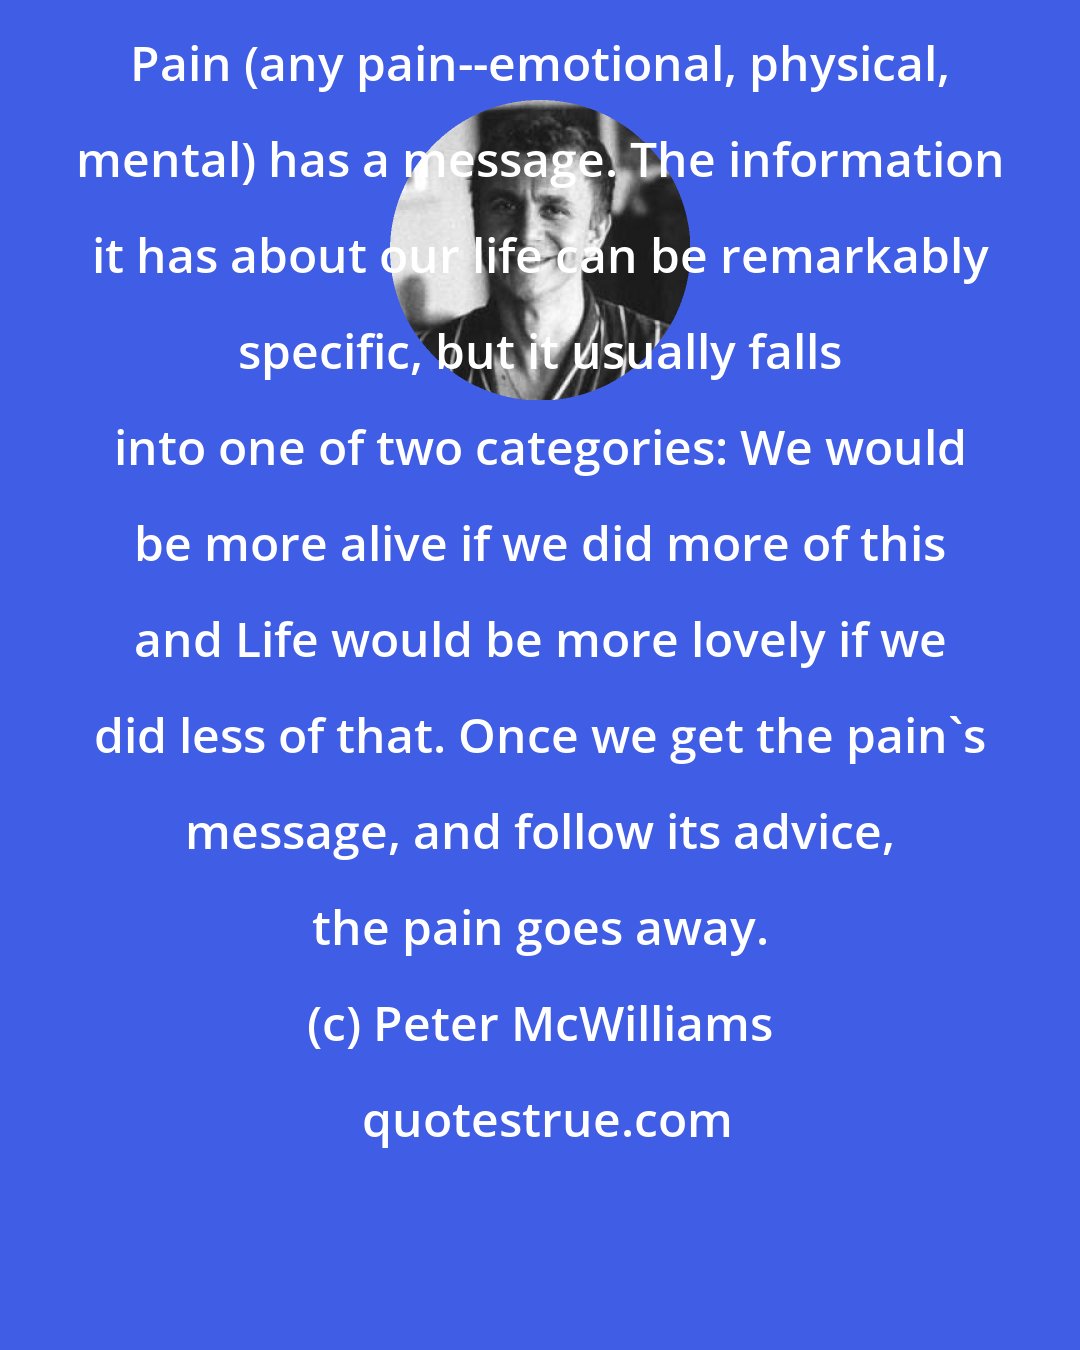 Peter McWilliams: Pain (any pain--emotional, physical, mental) has a message. The information it has about our life can be remarkably specific, but it usually falls into one of two categories: We would be more alive if we did more of this and Life would be more lovely if we did less of that. Once we get the pain's message, and follow its advice, the pain goes away.